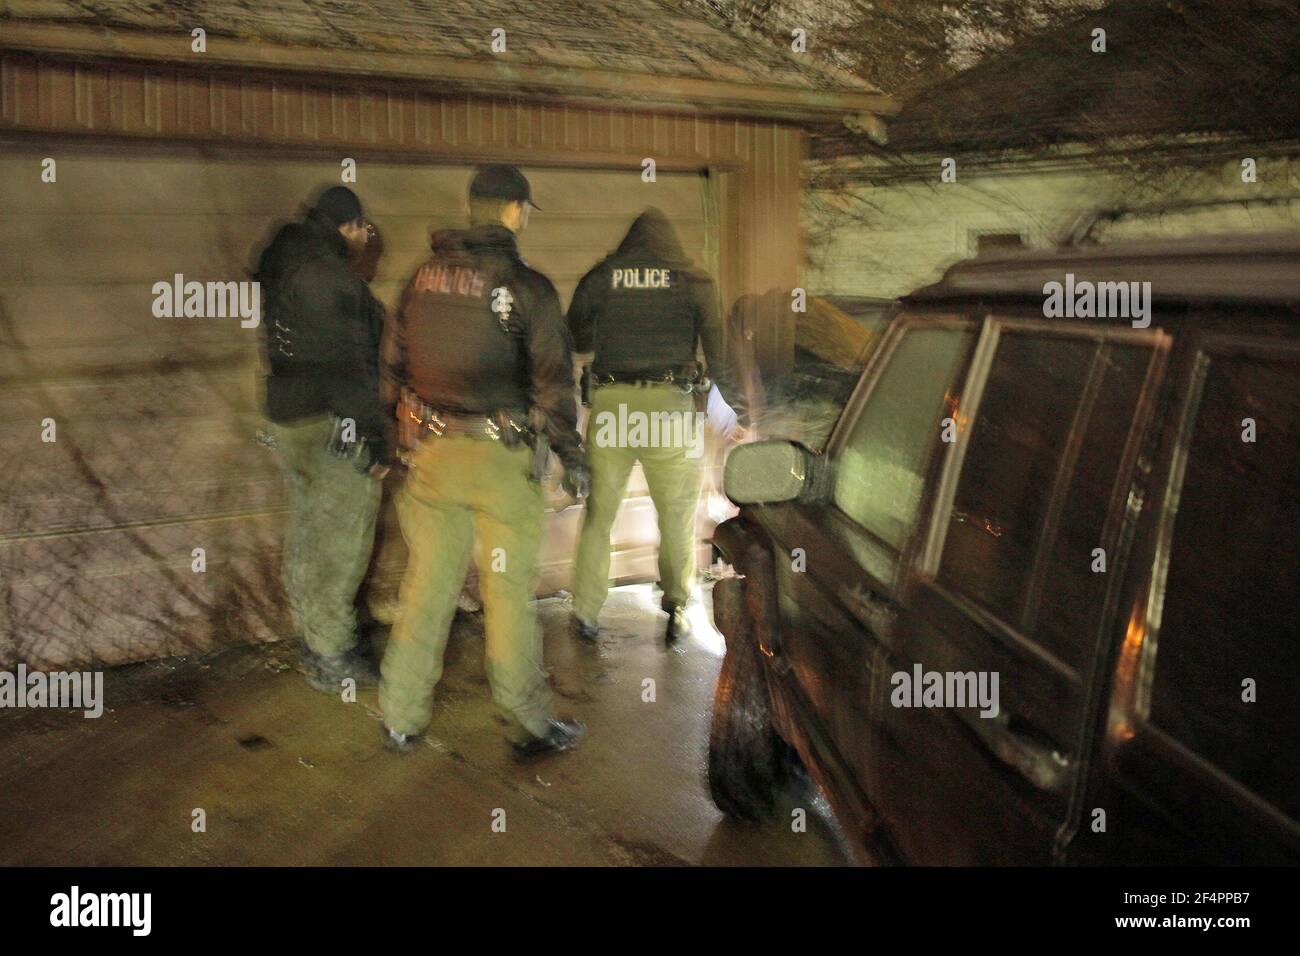 Police officers search the back yard of a building at night, Detroit, Michigan, USA Stock Photo